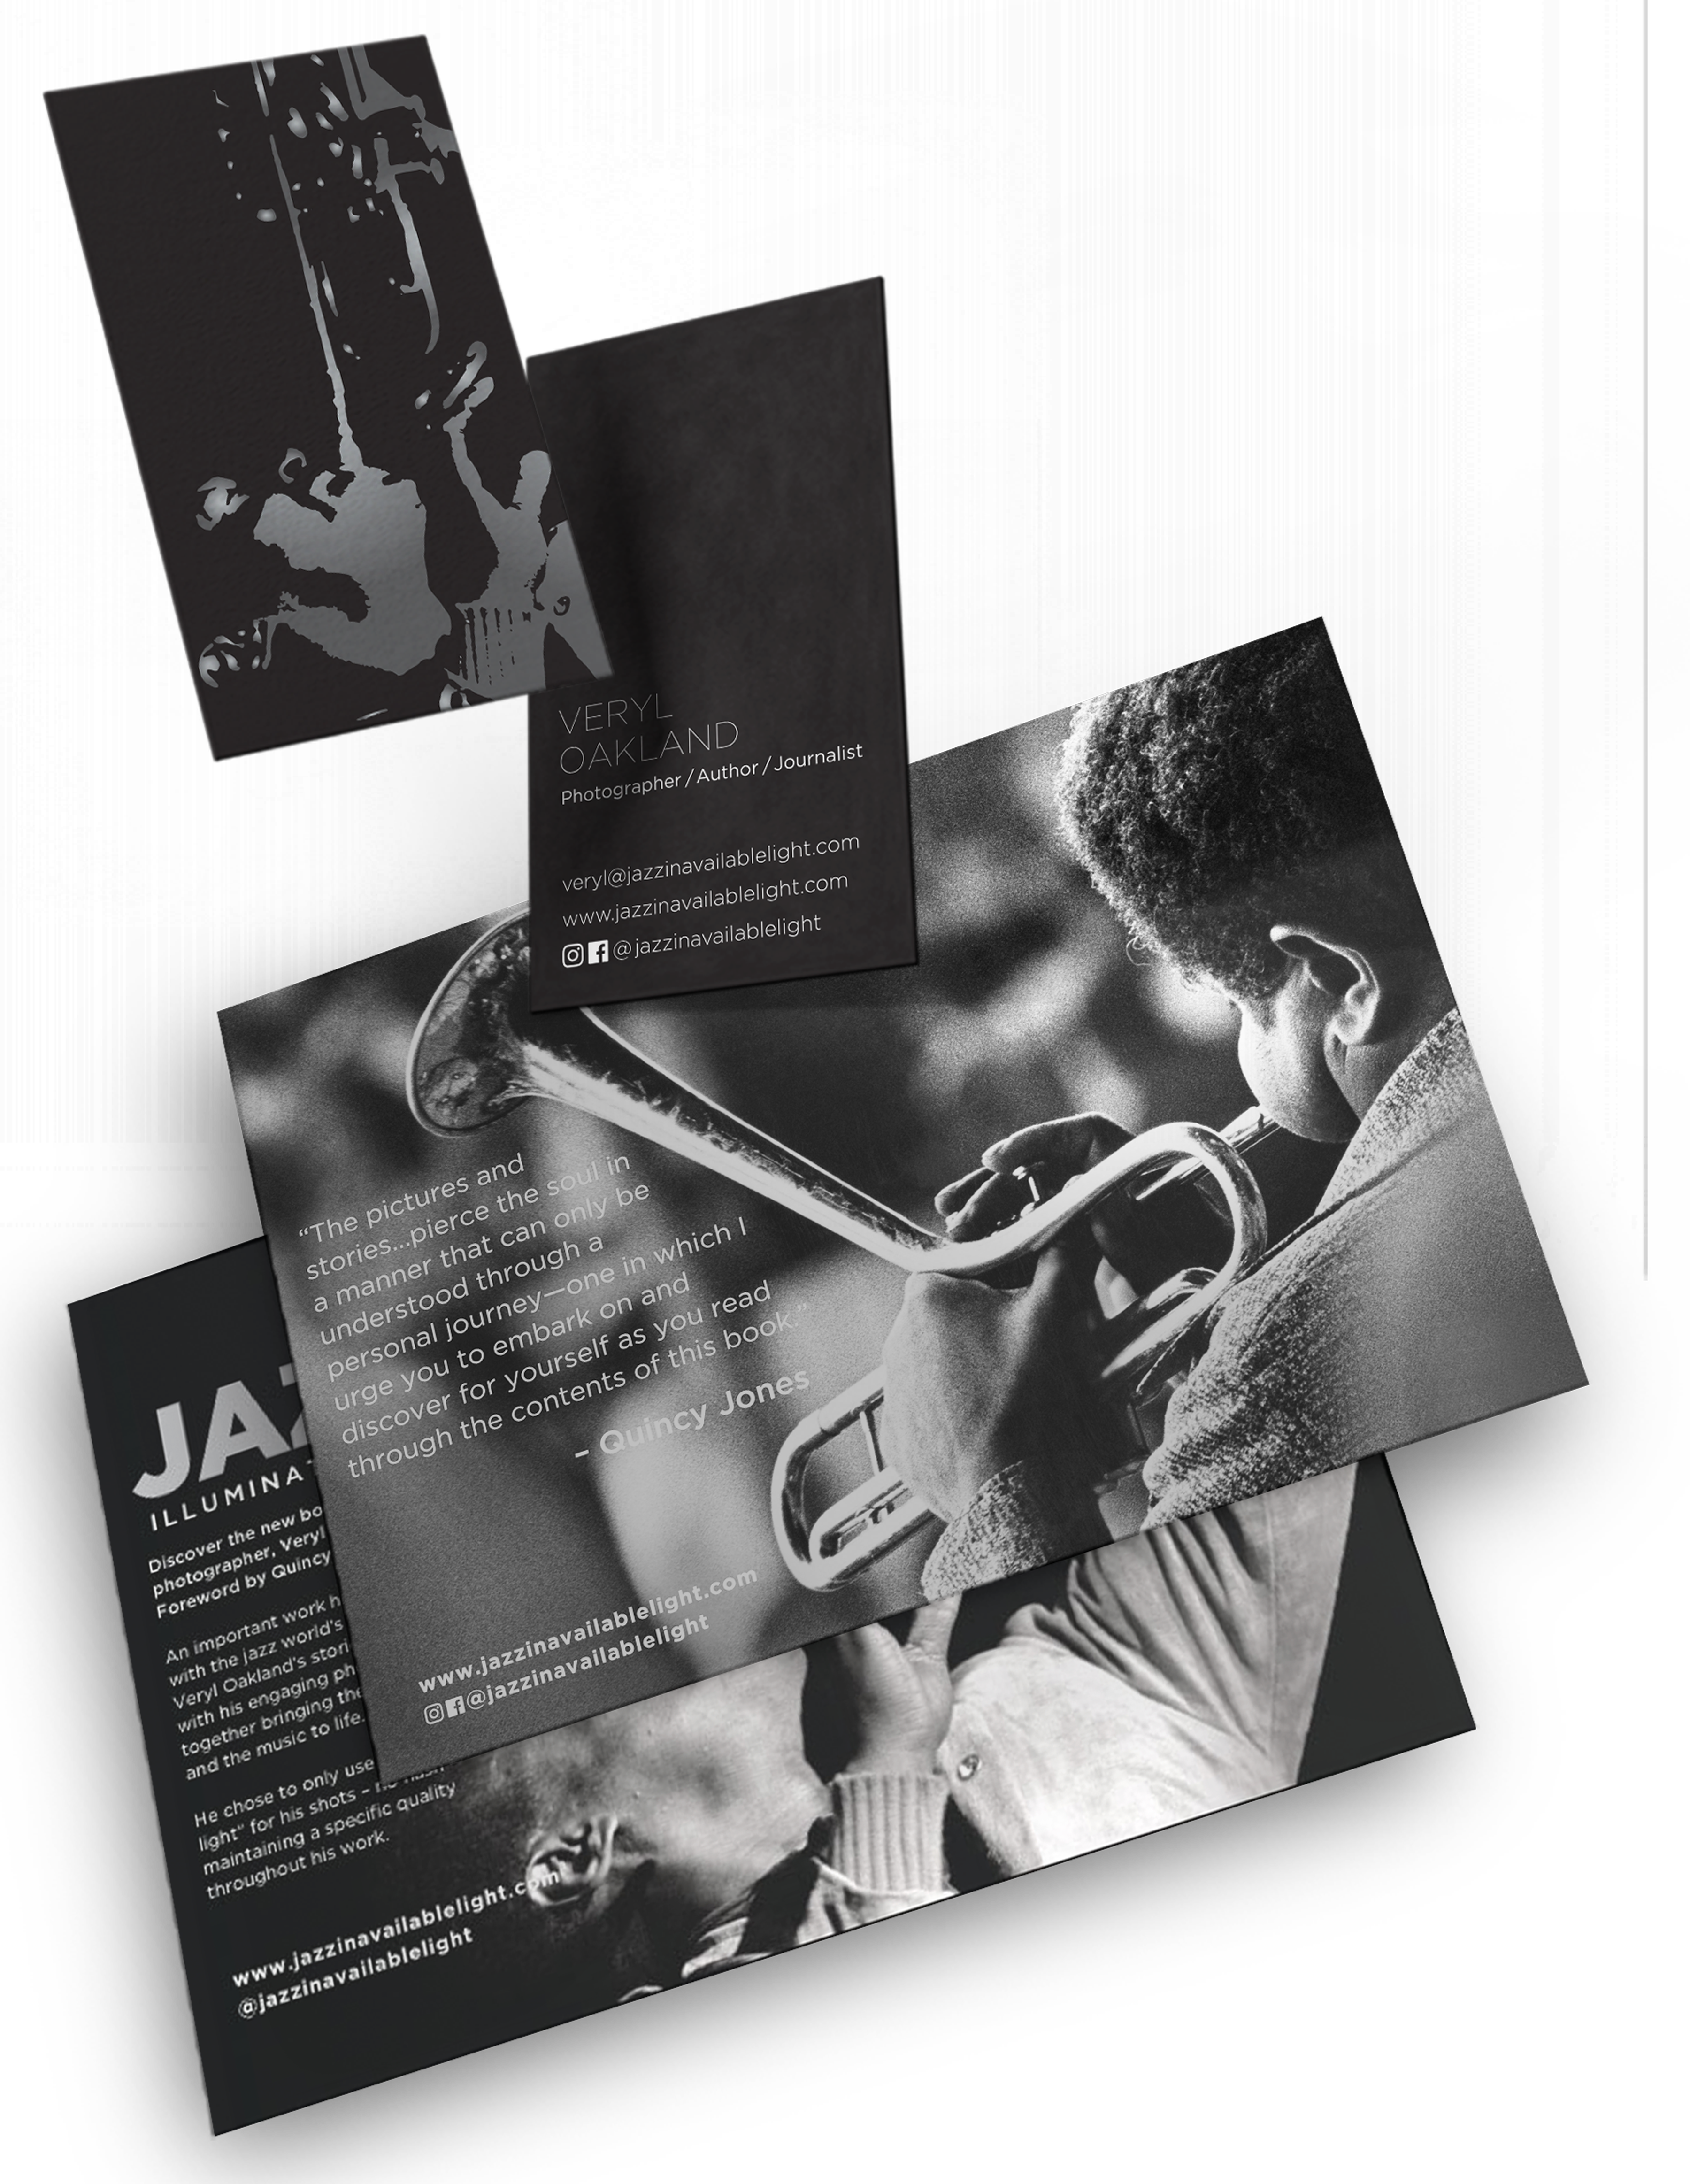 Marketing materials such as postcards and business cards showing Miles Davis and Dizzy Gillespie